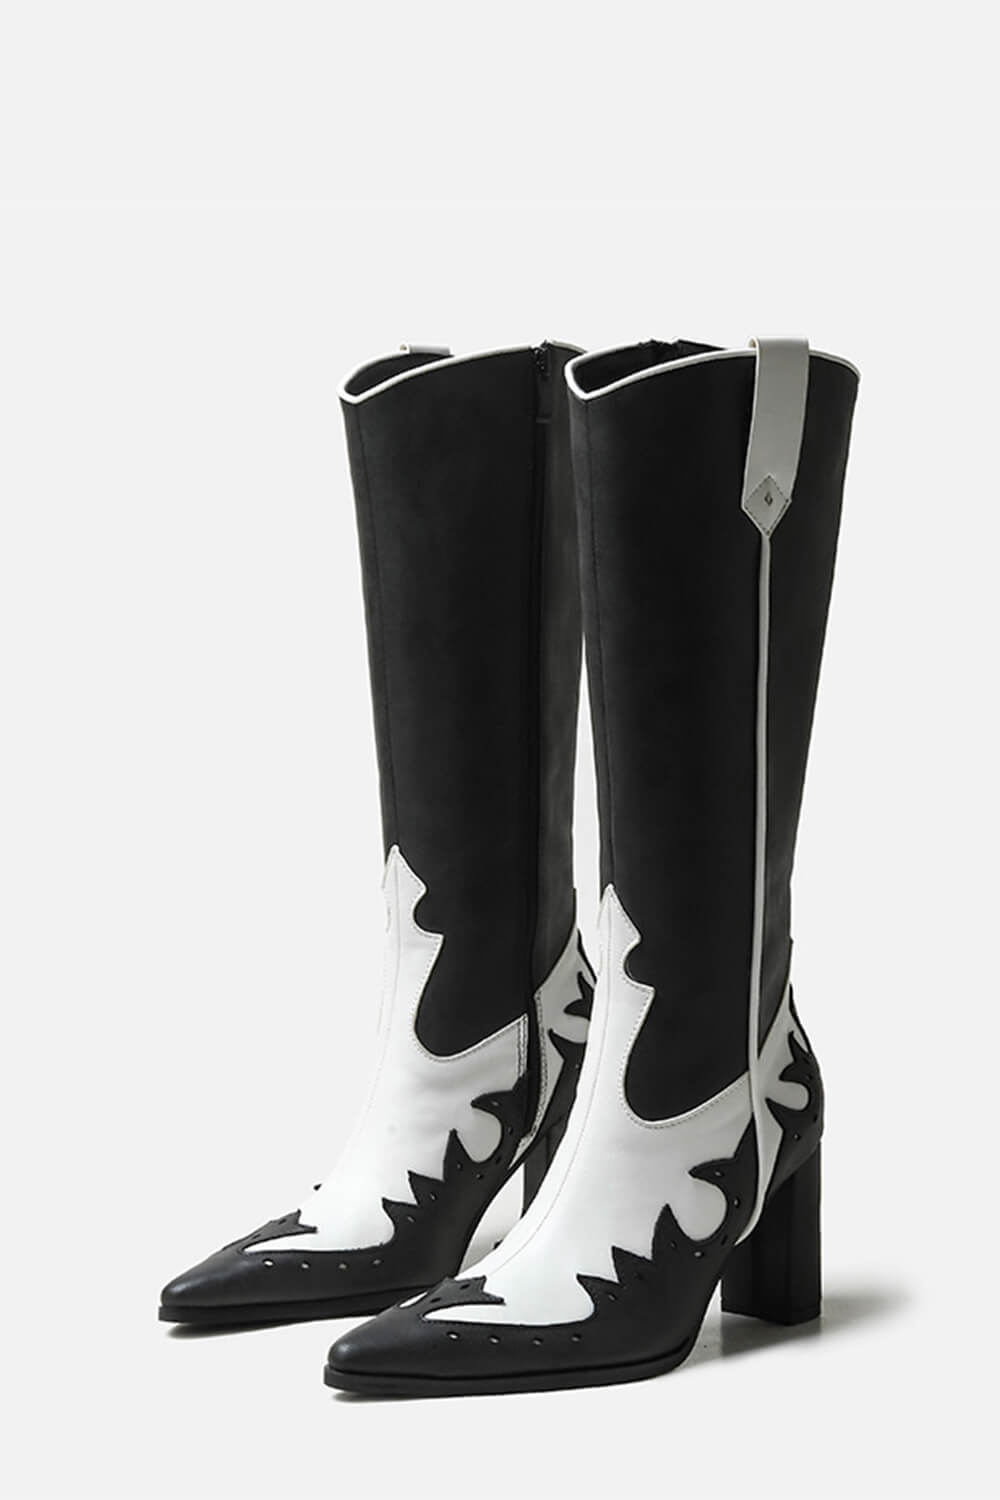 Contrast Western Cowboy Pointed Toe Block Heeled Knee High Boots - Black White